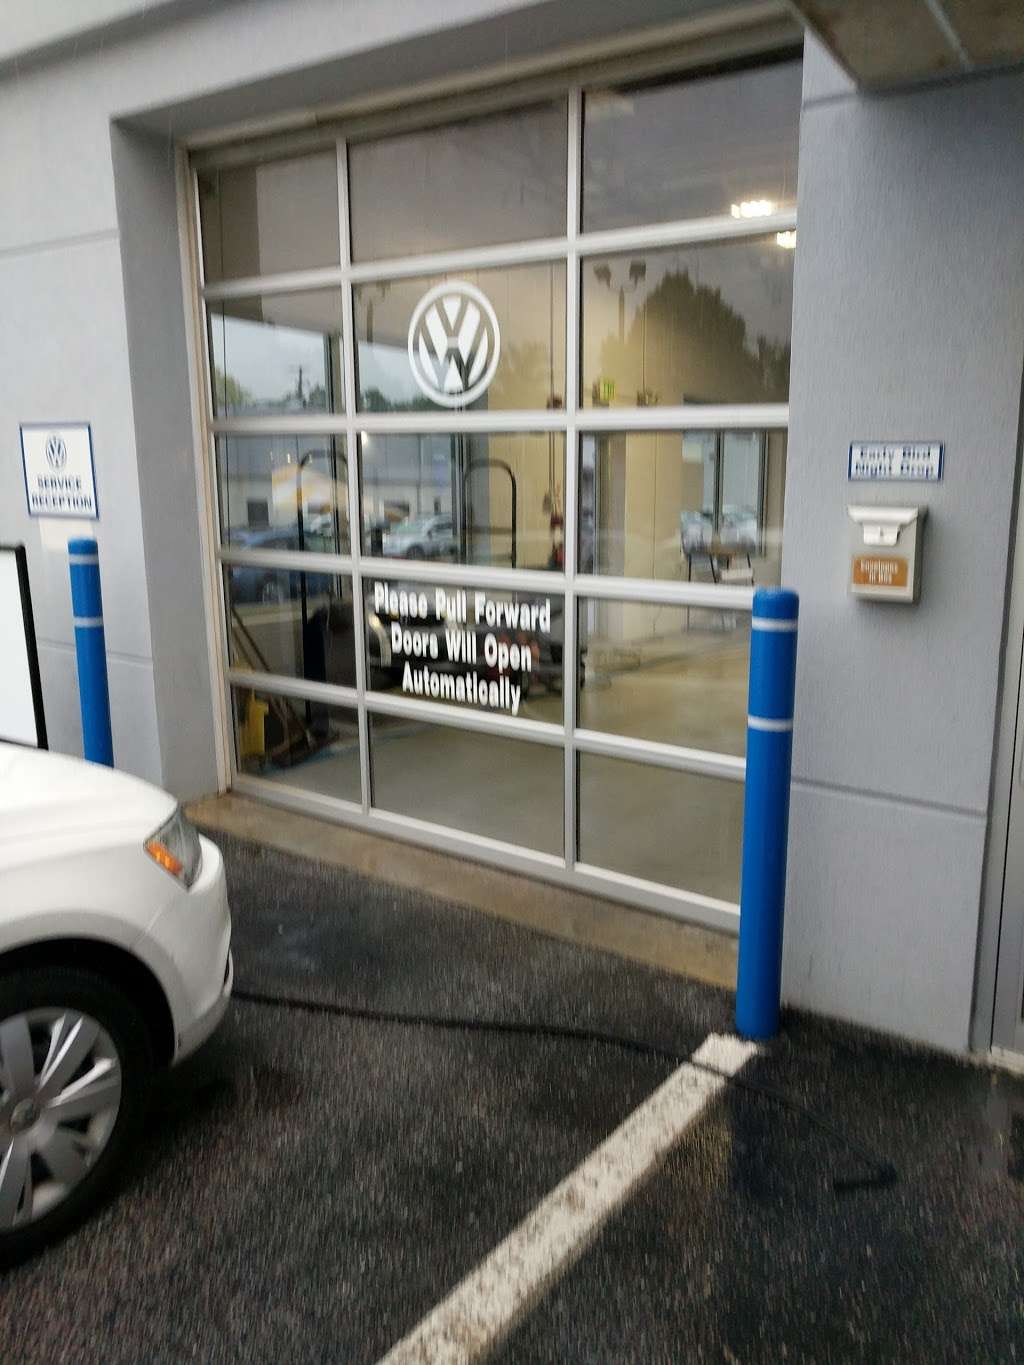 Heritage Volkswagen Catonsville | 6624 Baltimore National Pike, Catonsville, MD 21228 | Phone: (844) 224-1956